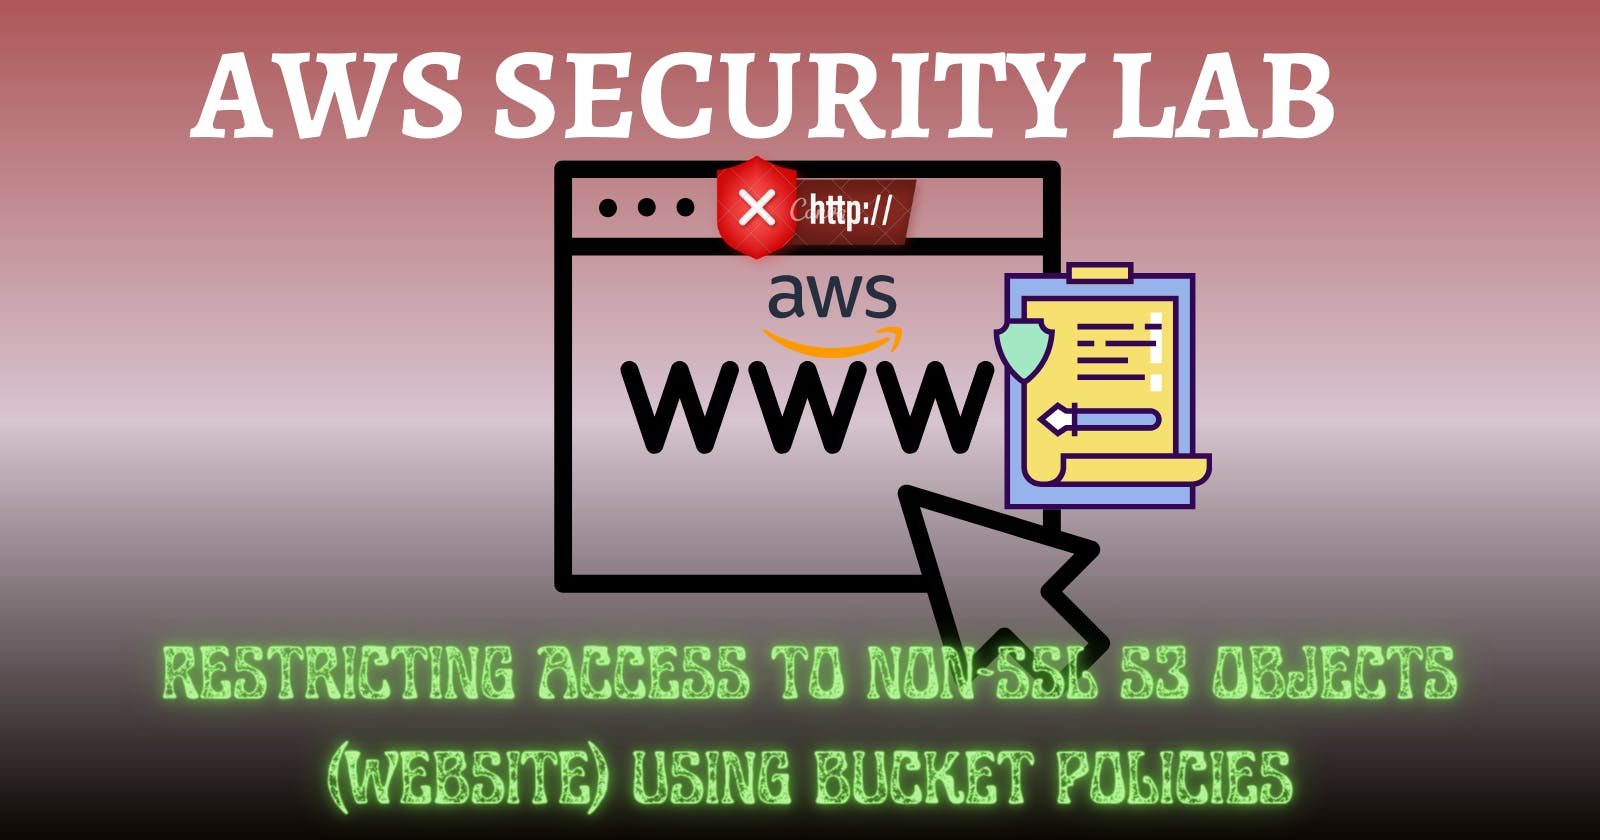 Restricting Access to Non-SSL S3 Objects (website) using Bucket Policies